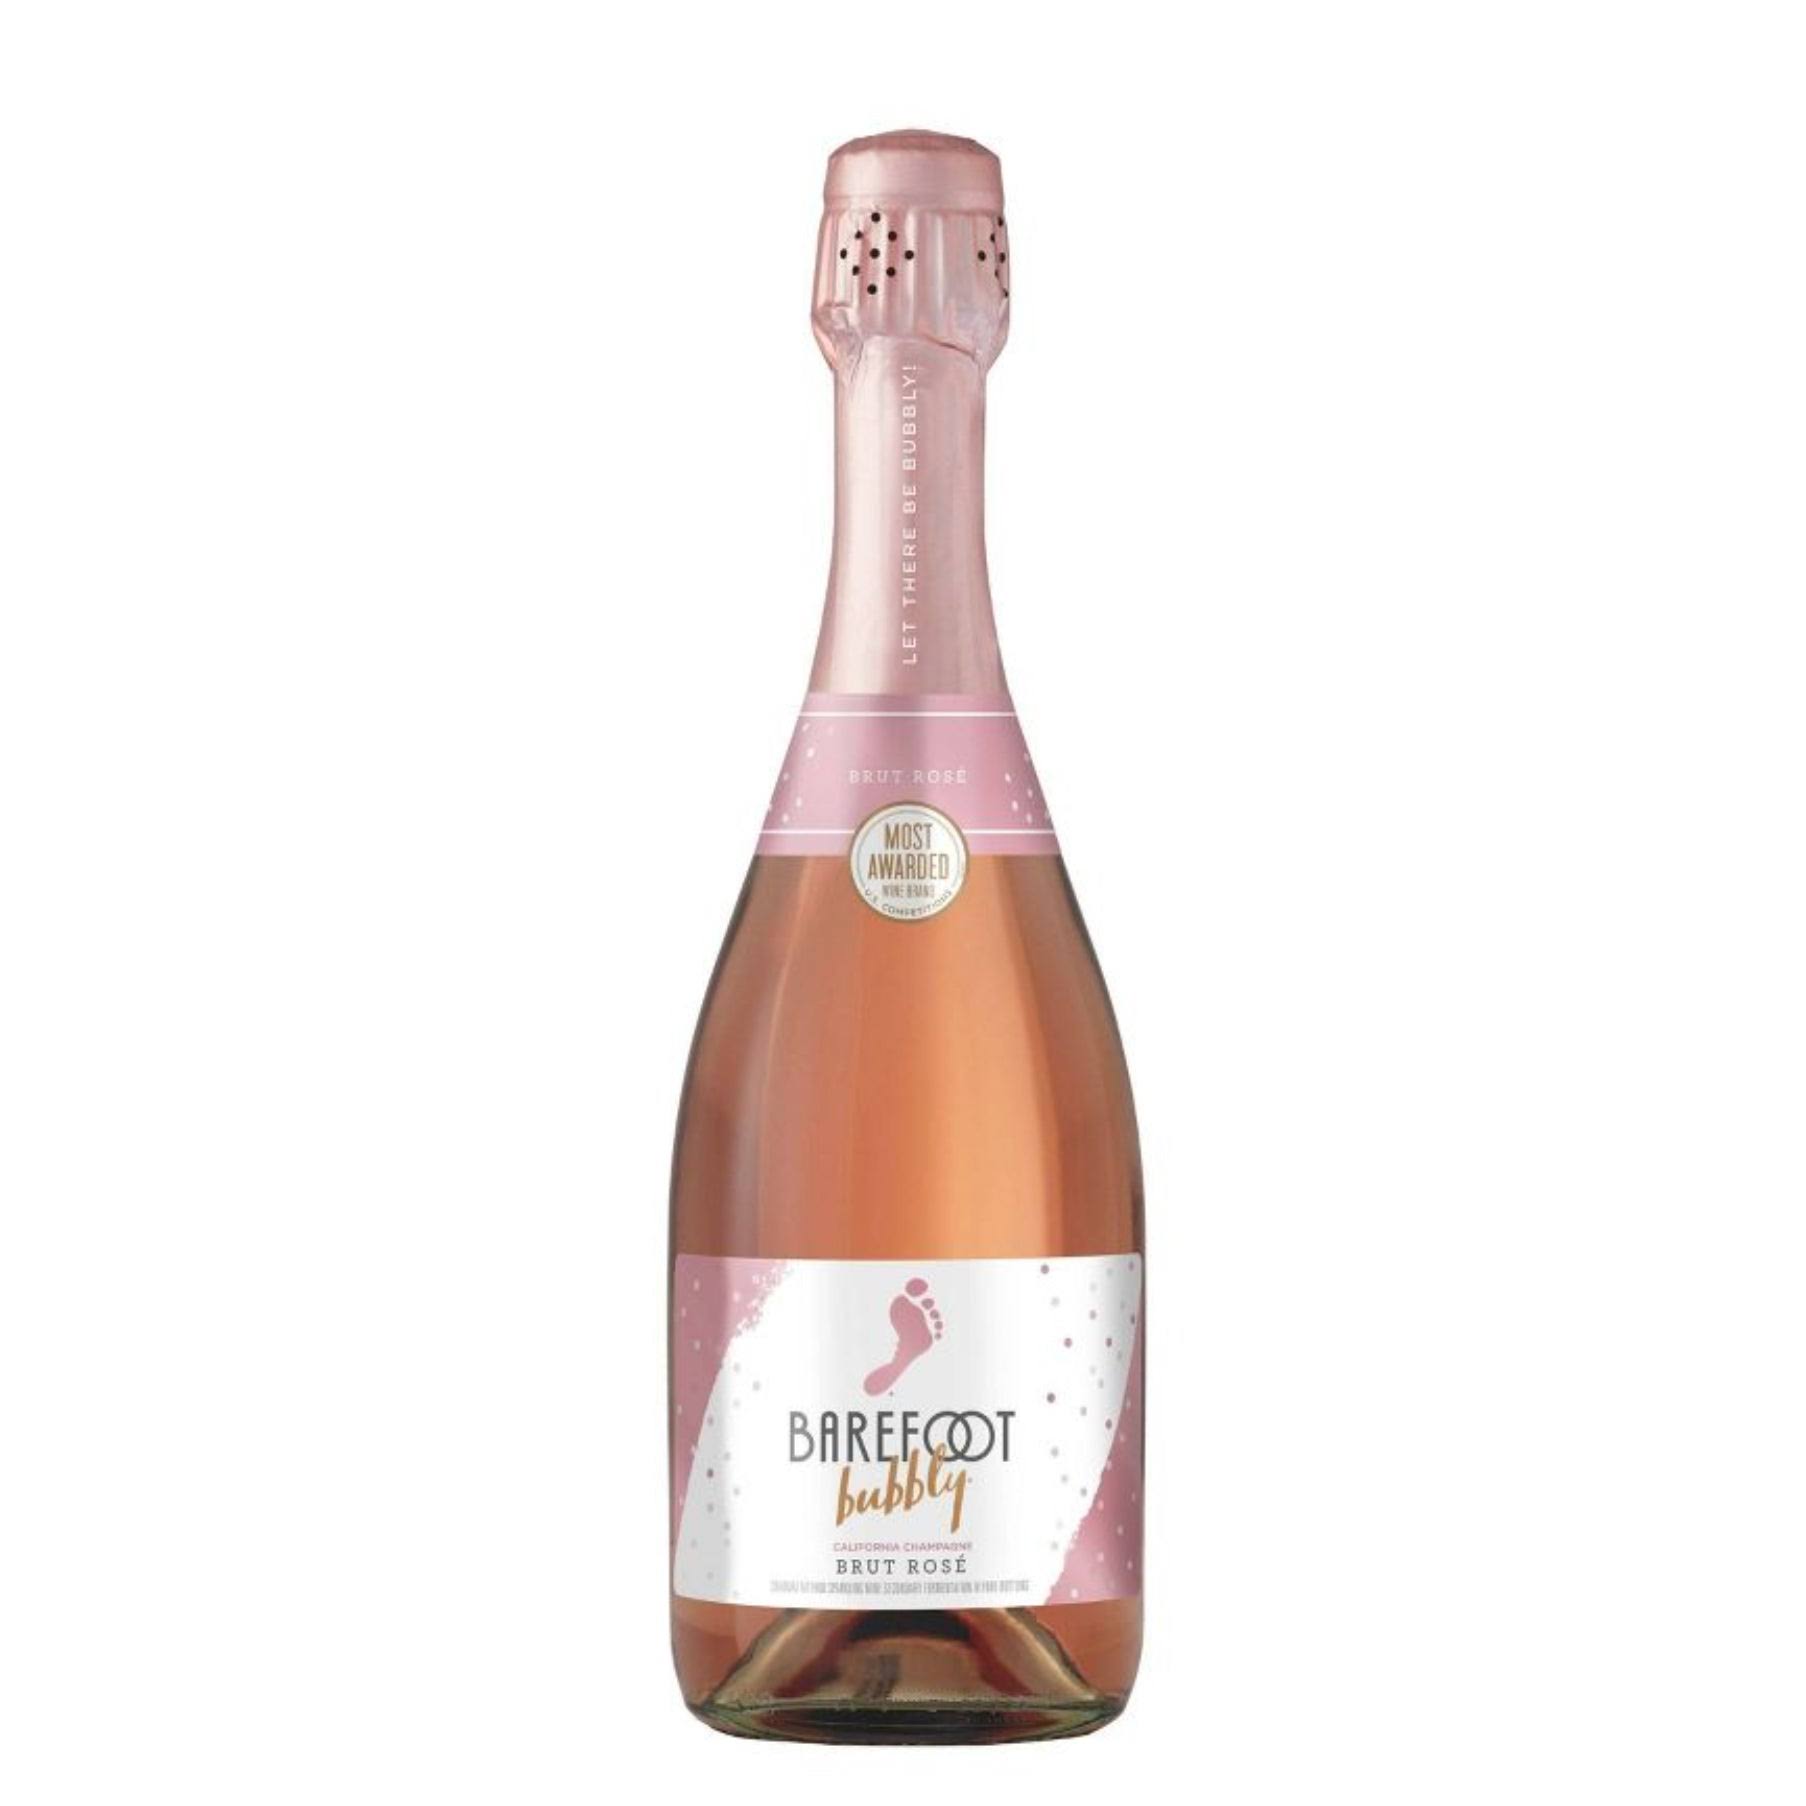 Barefoot Bubbly Champagne, Sparkling, Brut Rose, California - 750 ml